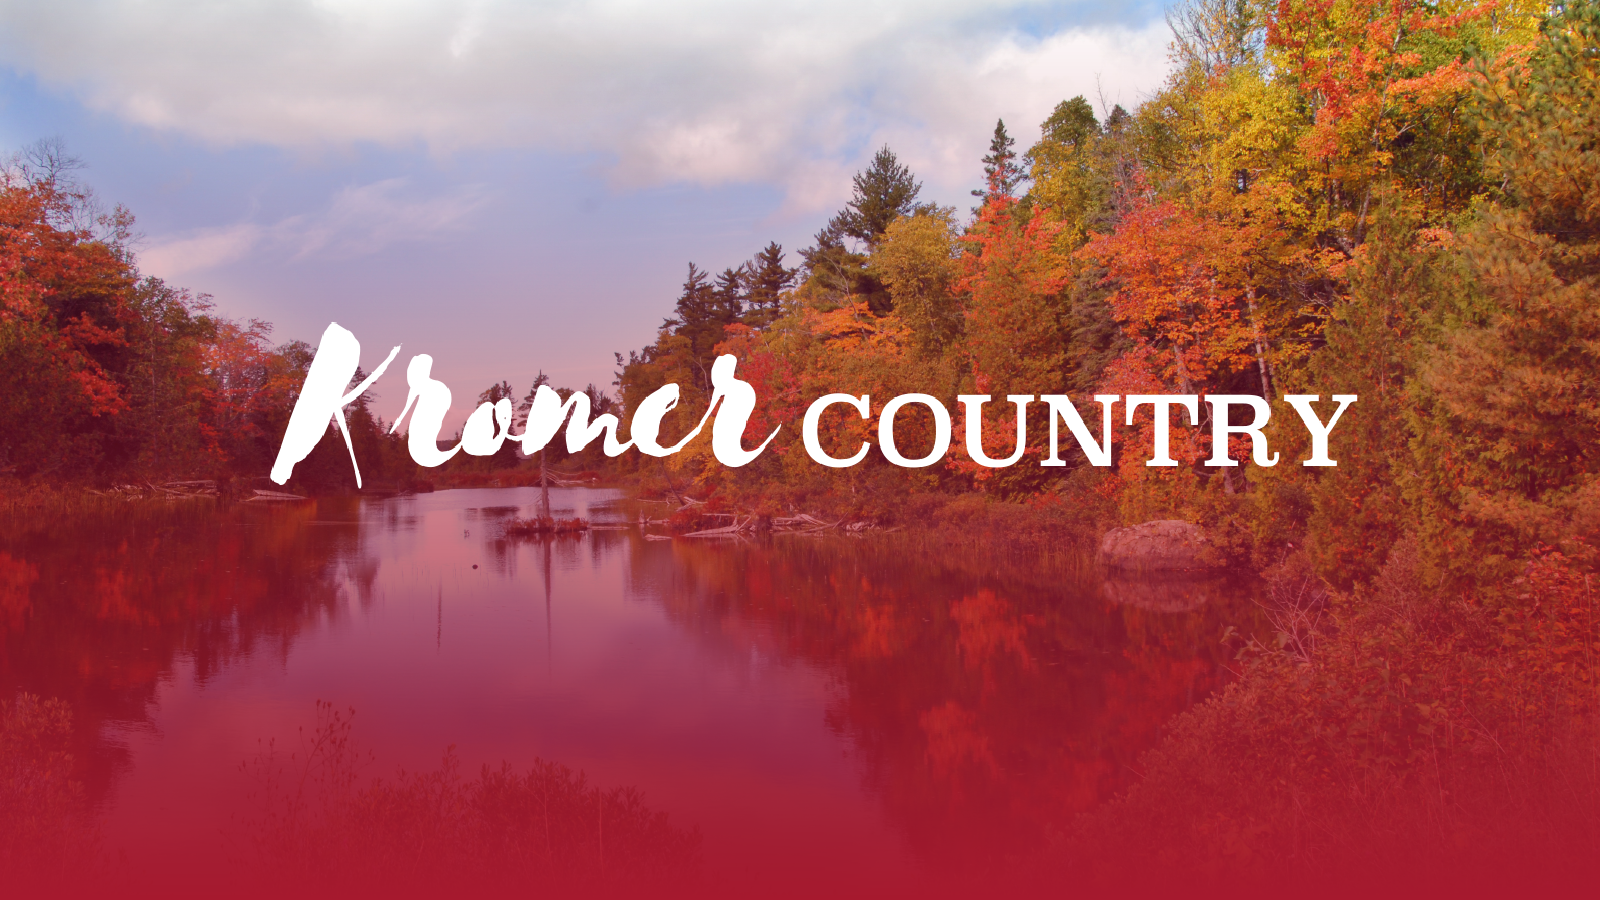 The Kromer Country logo floats on top of a forest background.